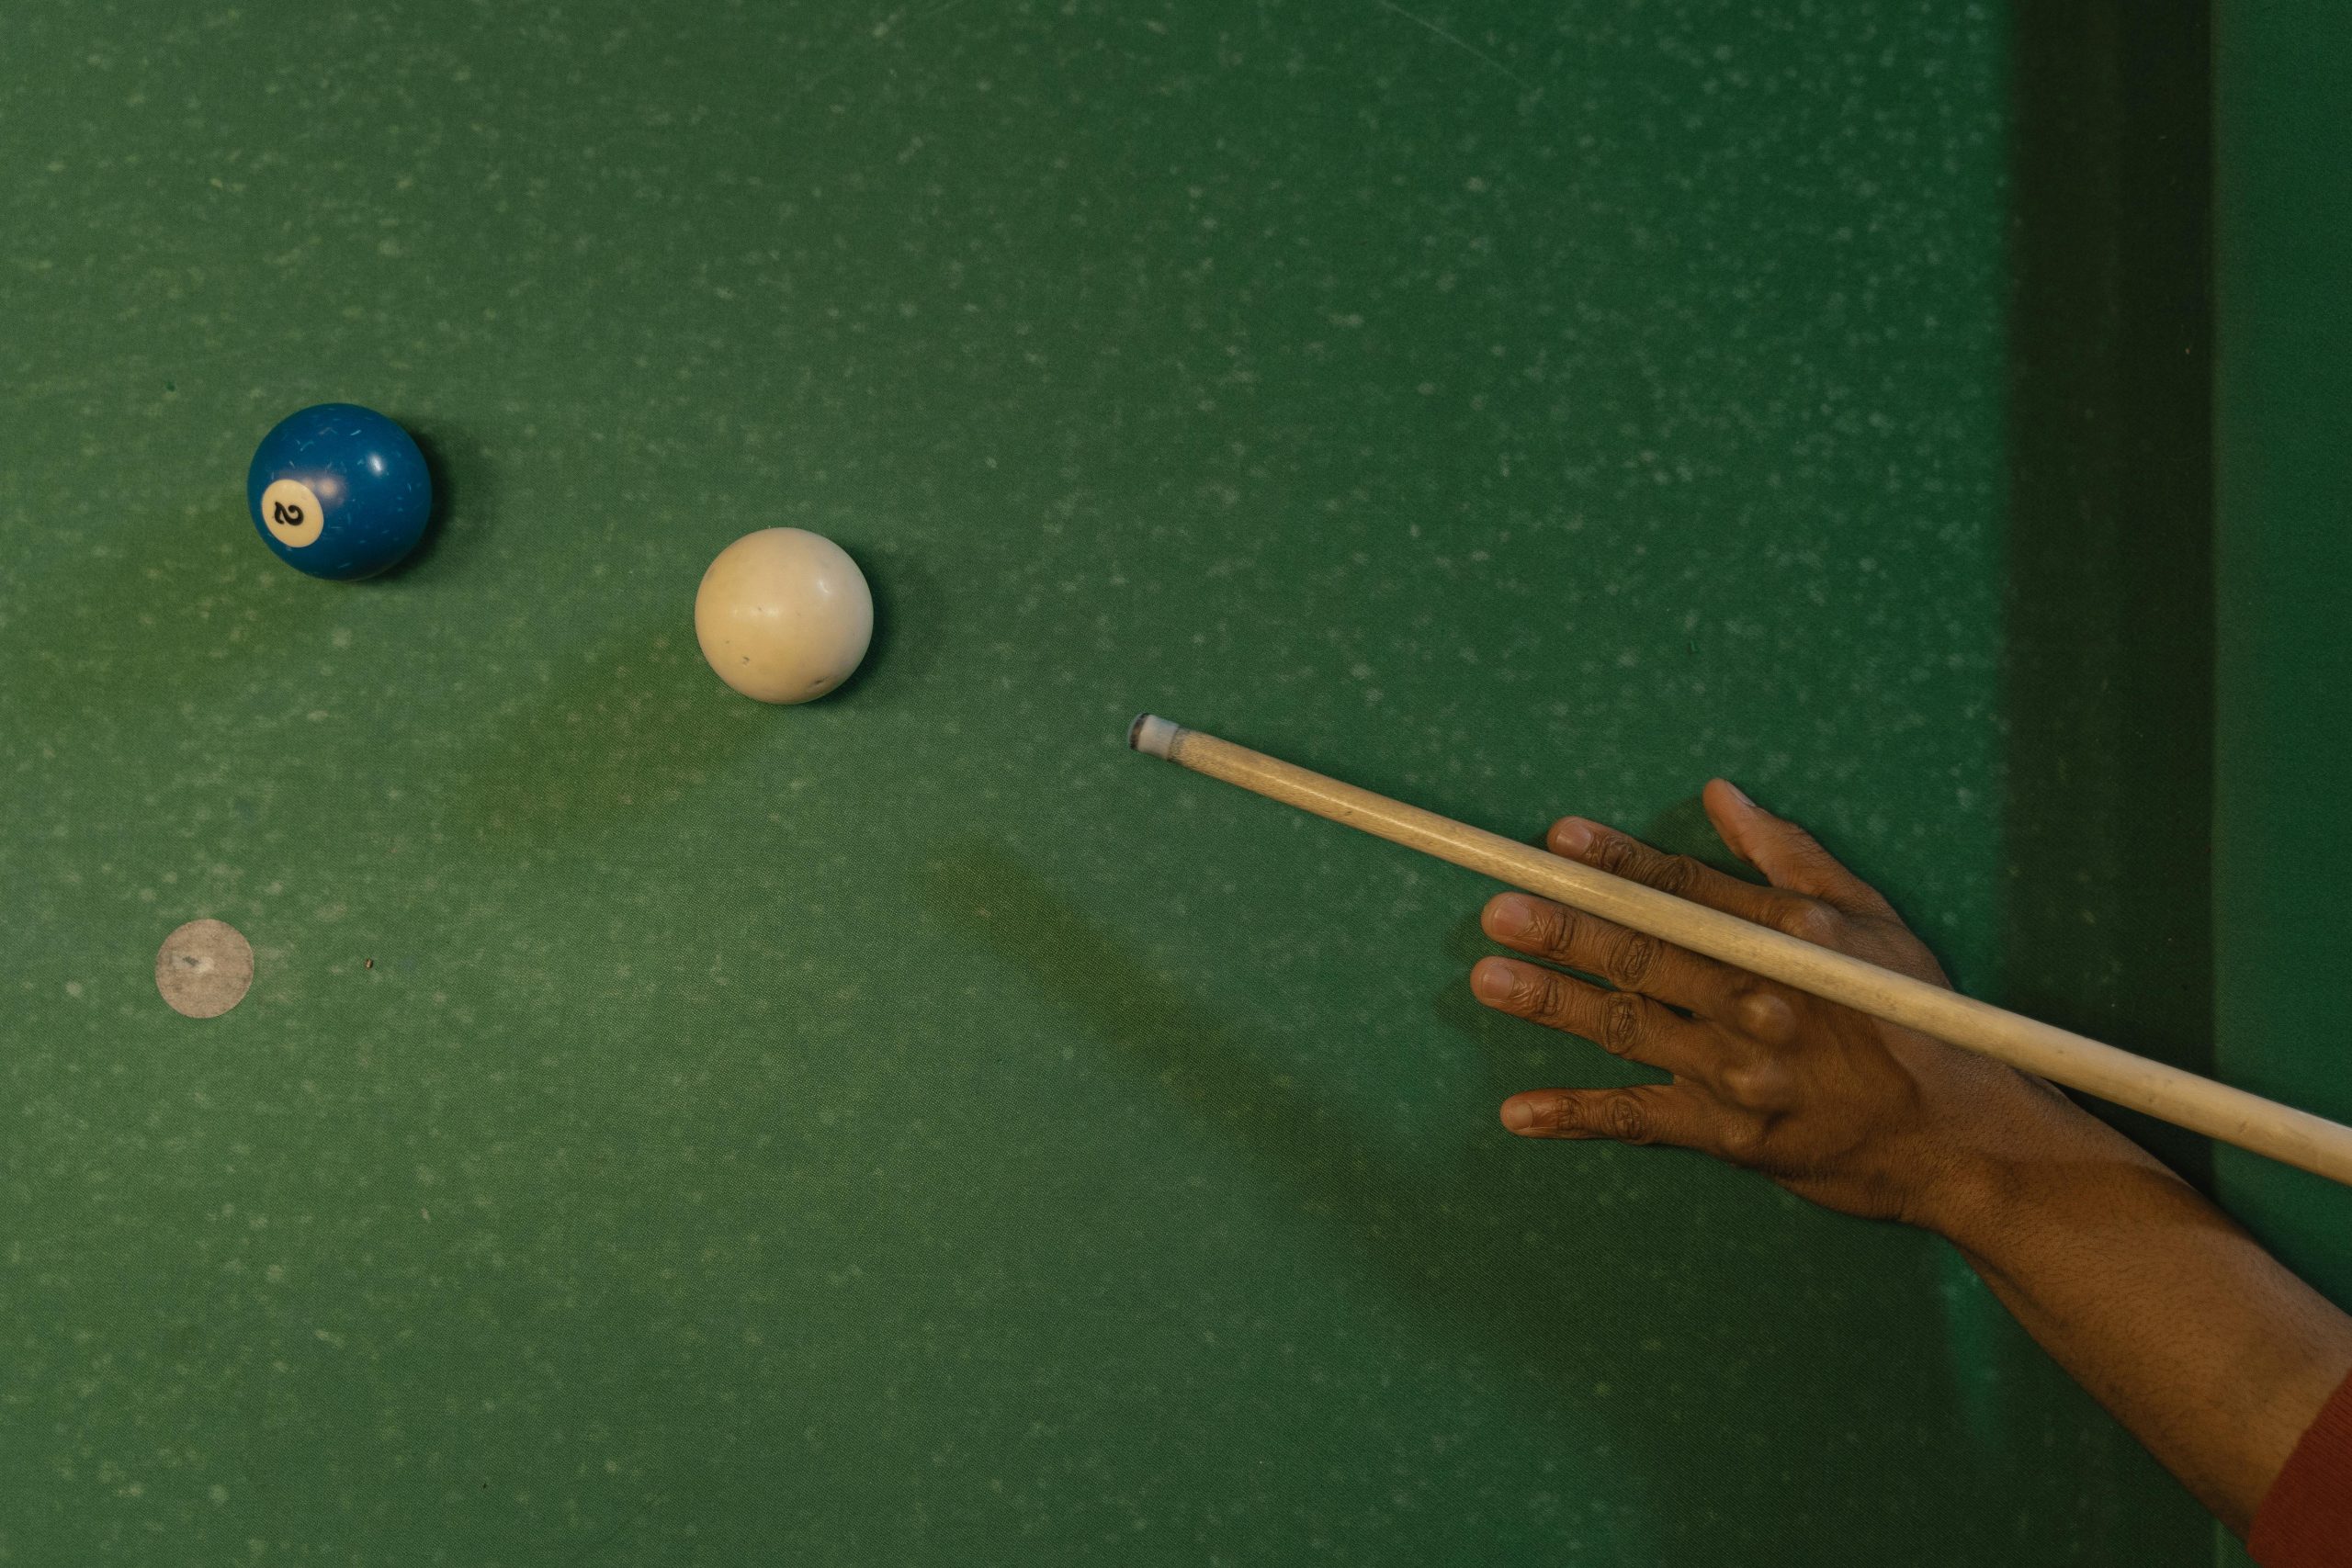 Billiards Maintenance: How To Know When To Refelt Your Table